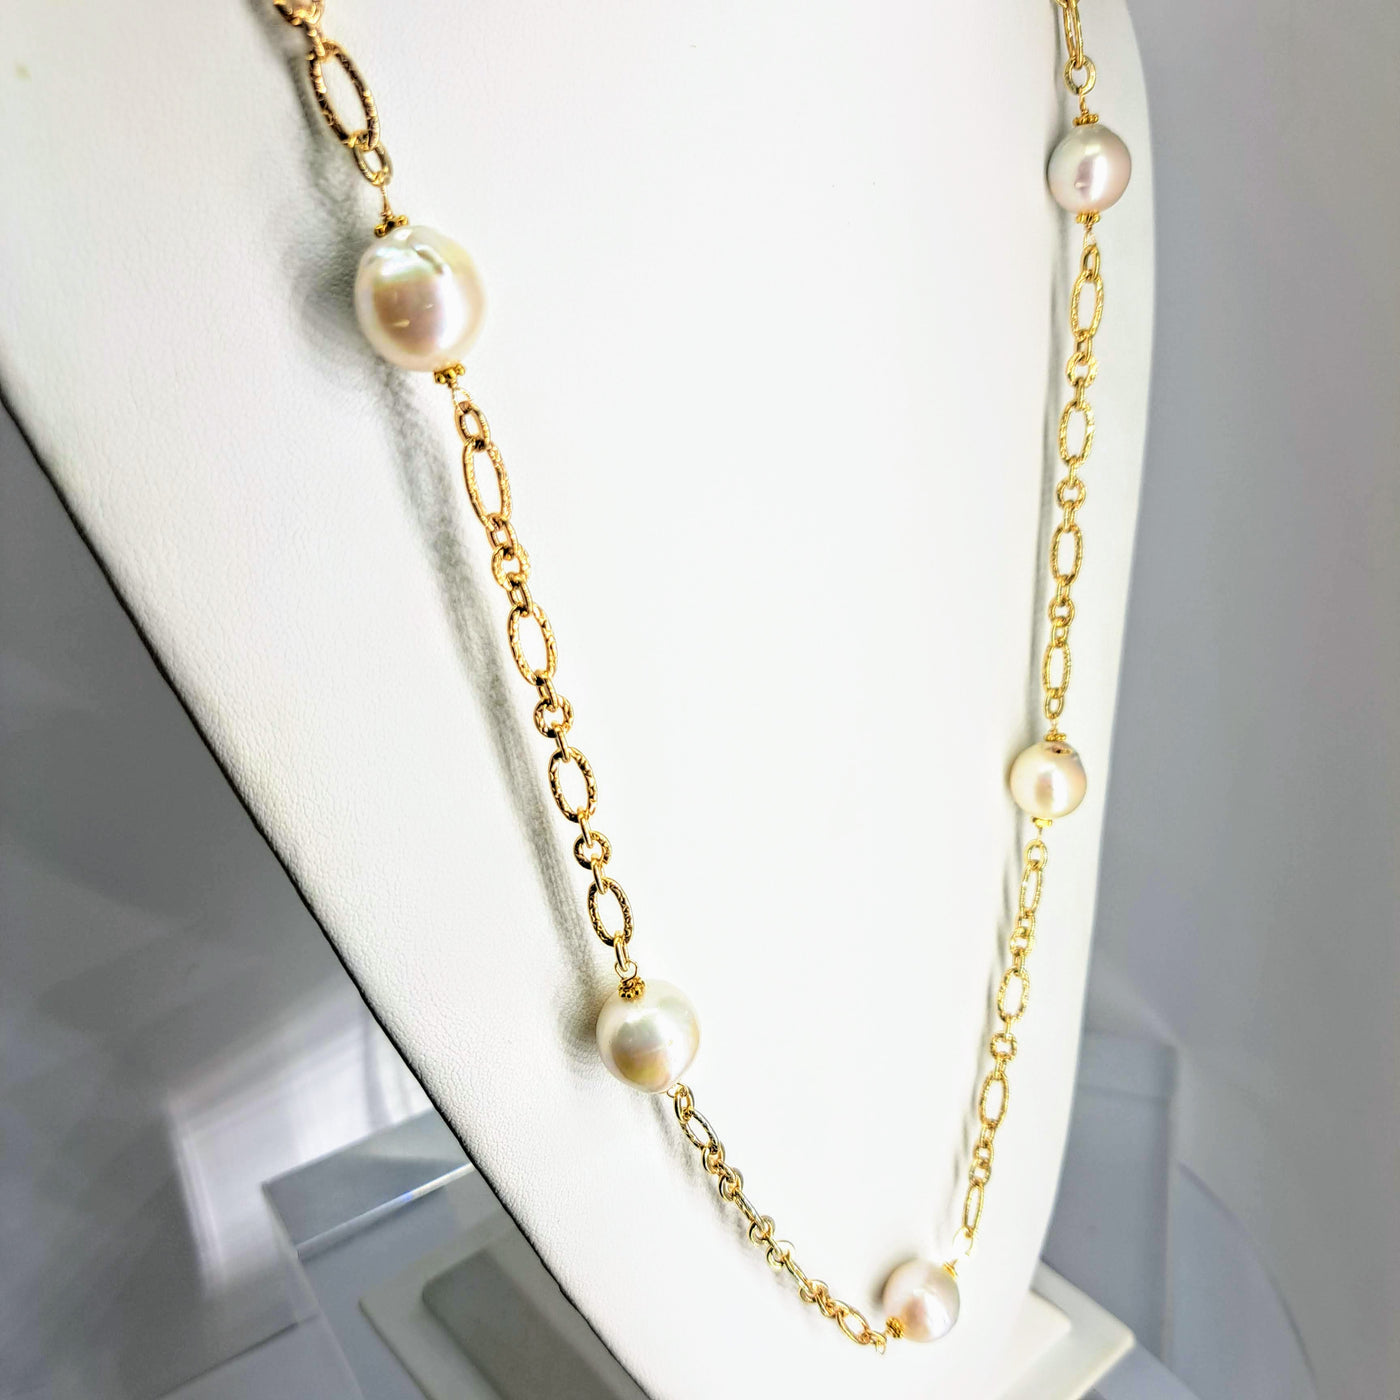 "Baroque Ball Chain" 34" Necklace - Baroque Pearls, Gold Sterling